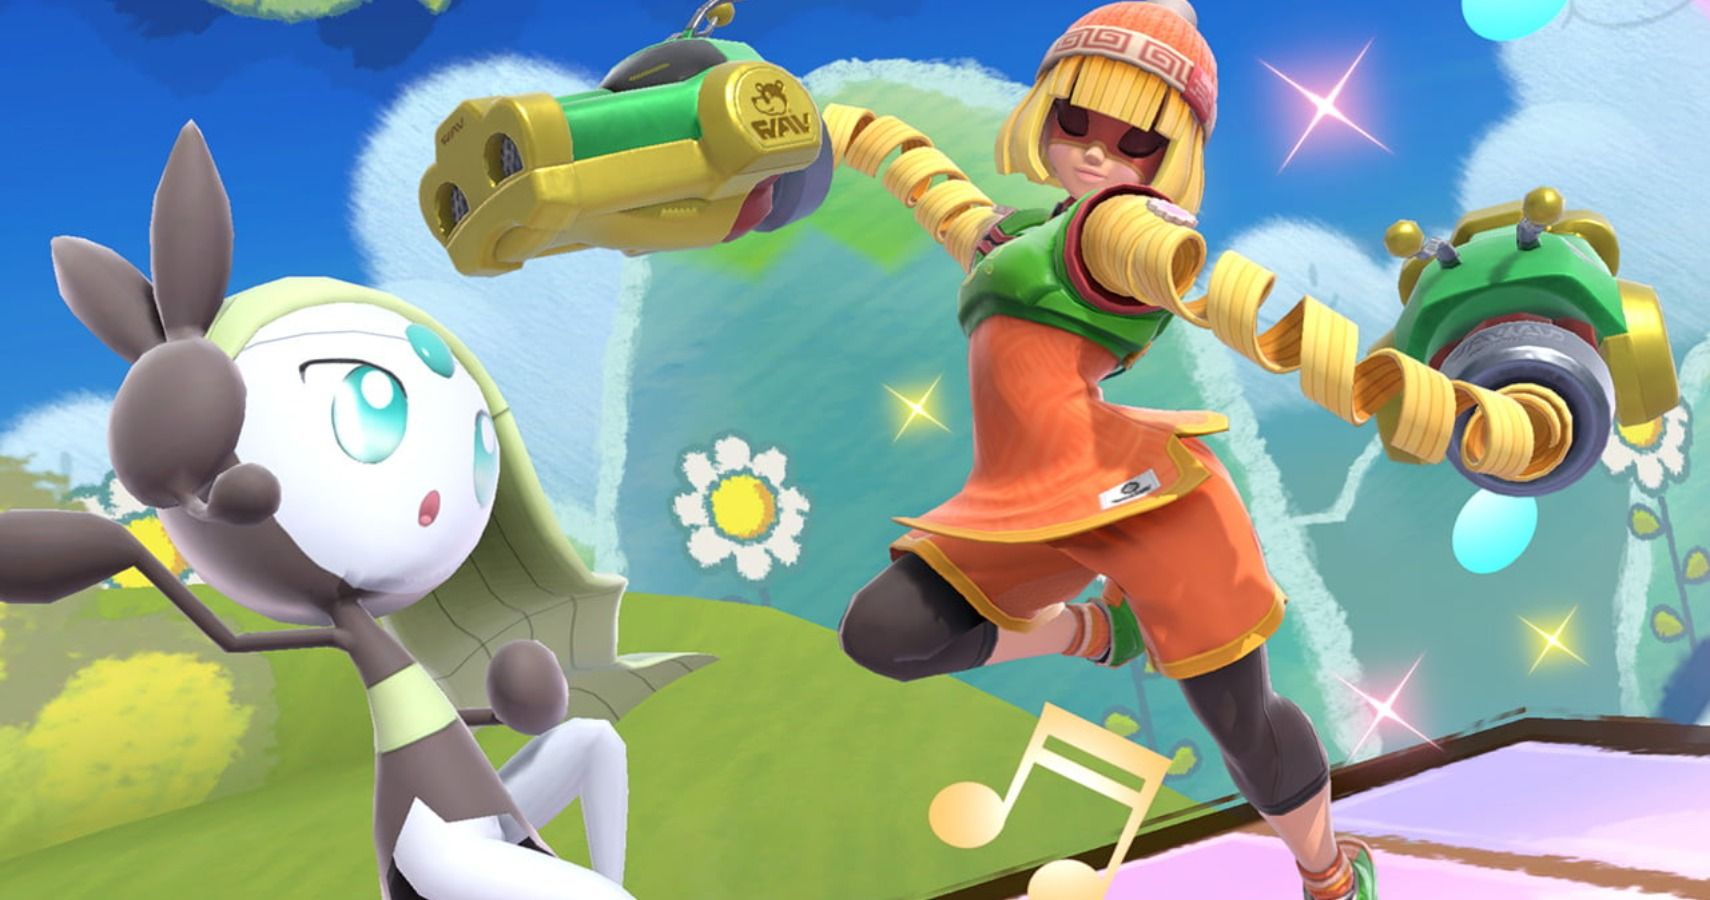 The Latest Smash Bros Update Required Permission From All IP Holders Involved With The Game